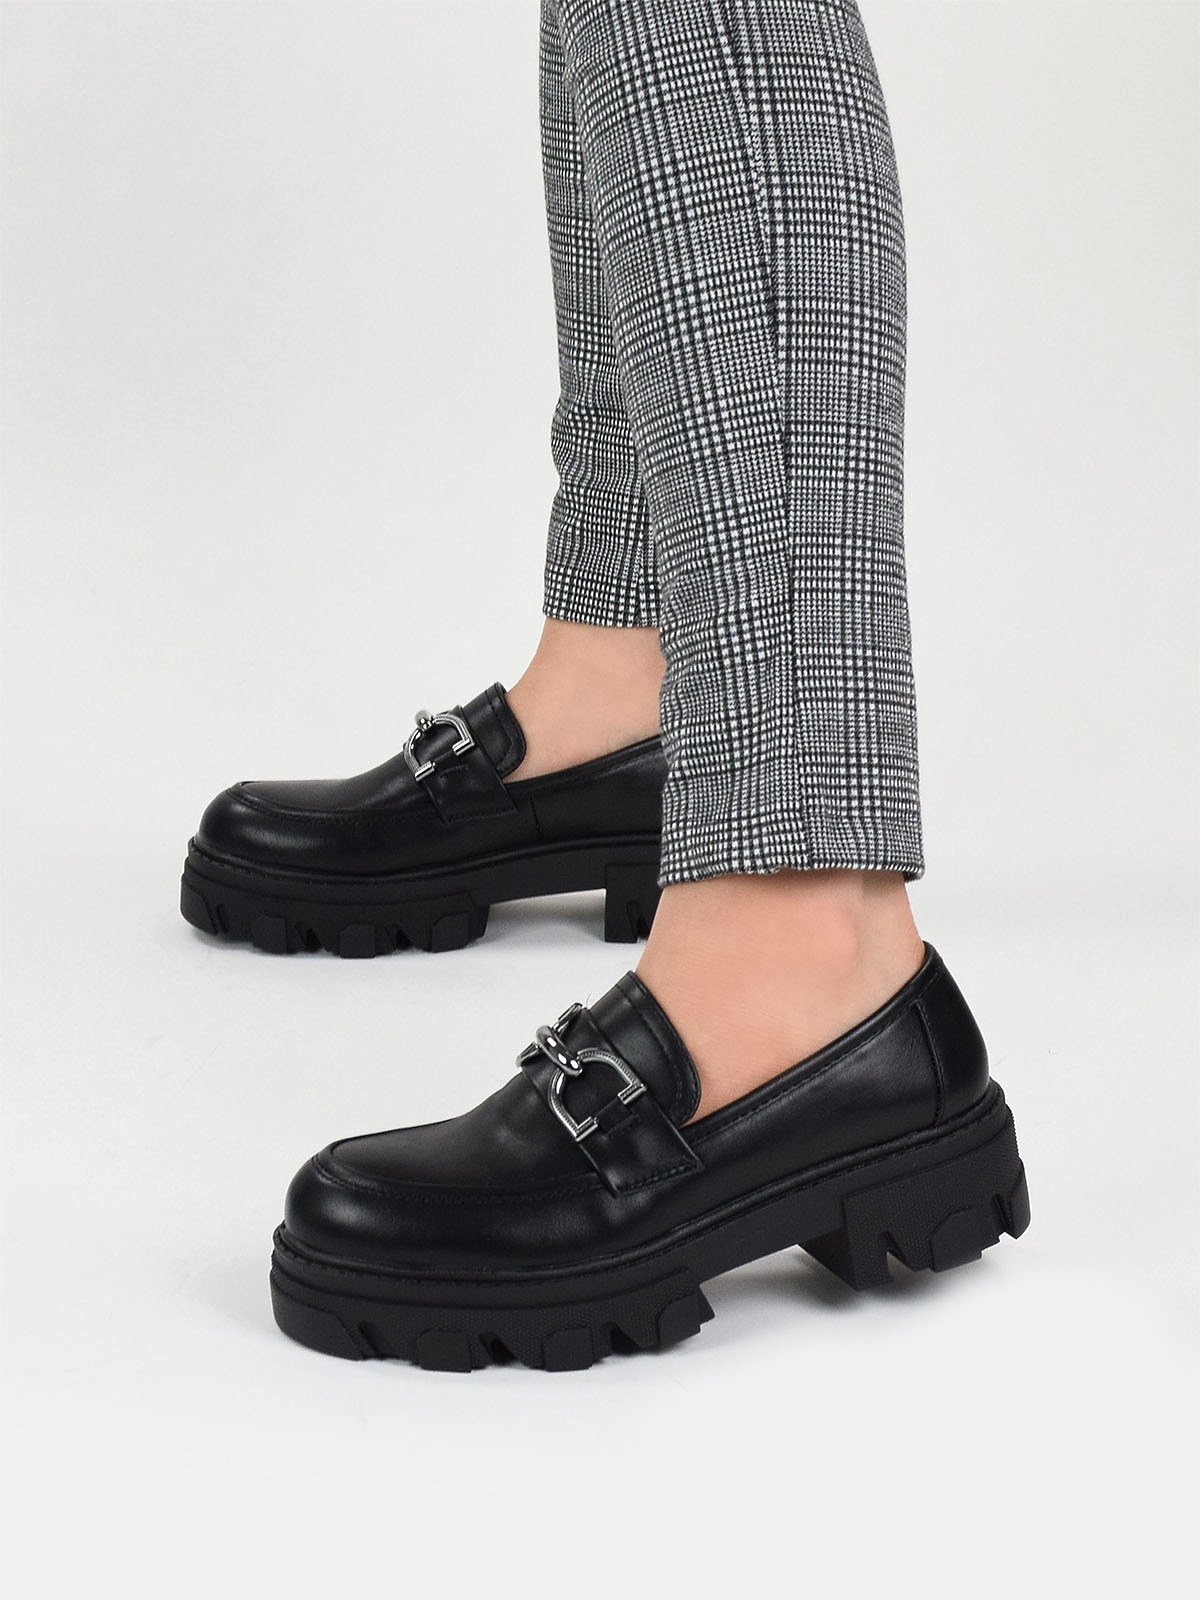 Chunky loafers with silver snaffle detail in black